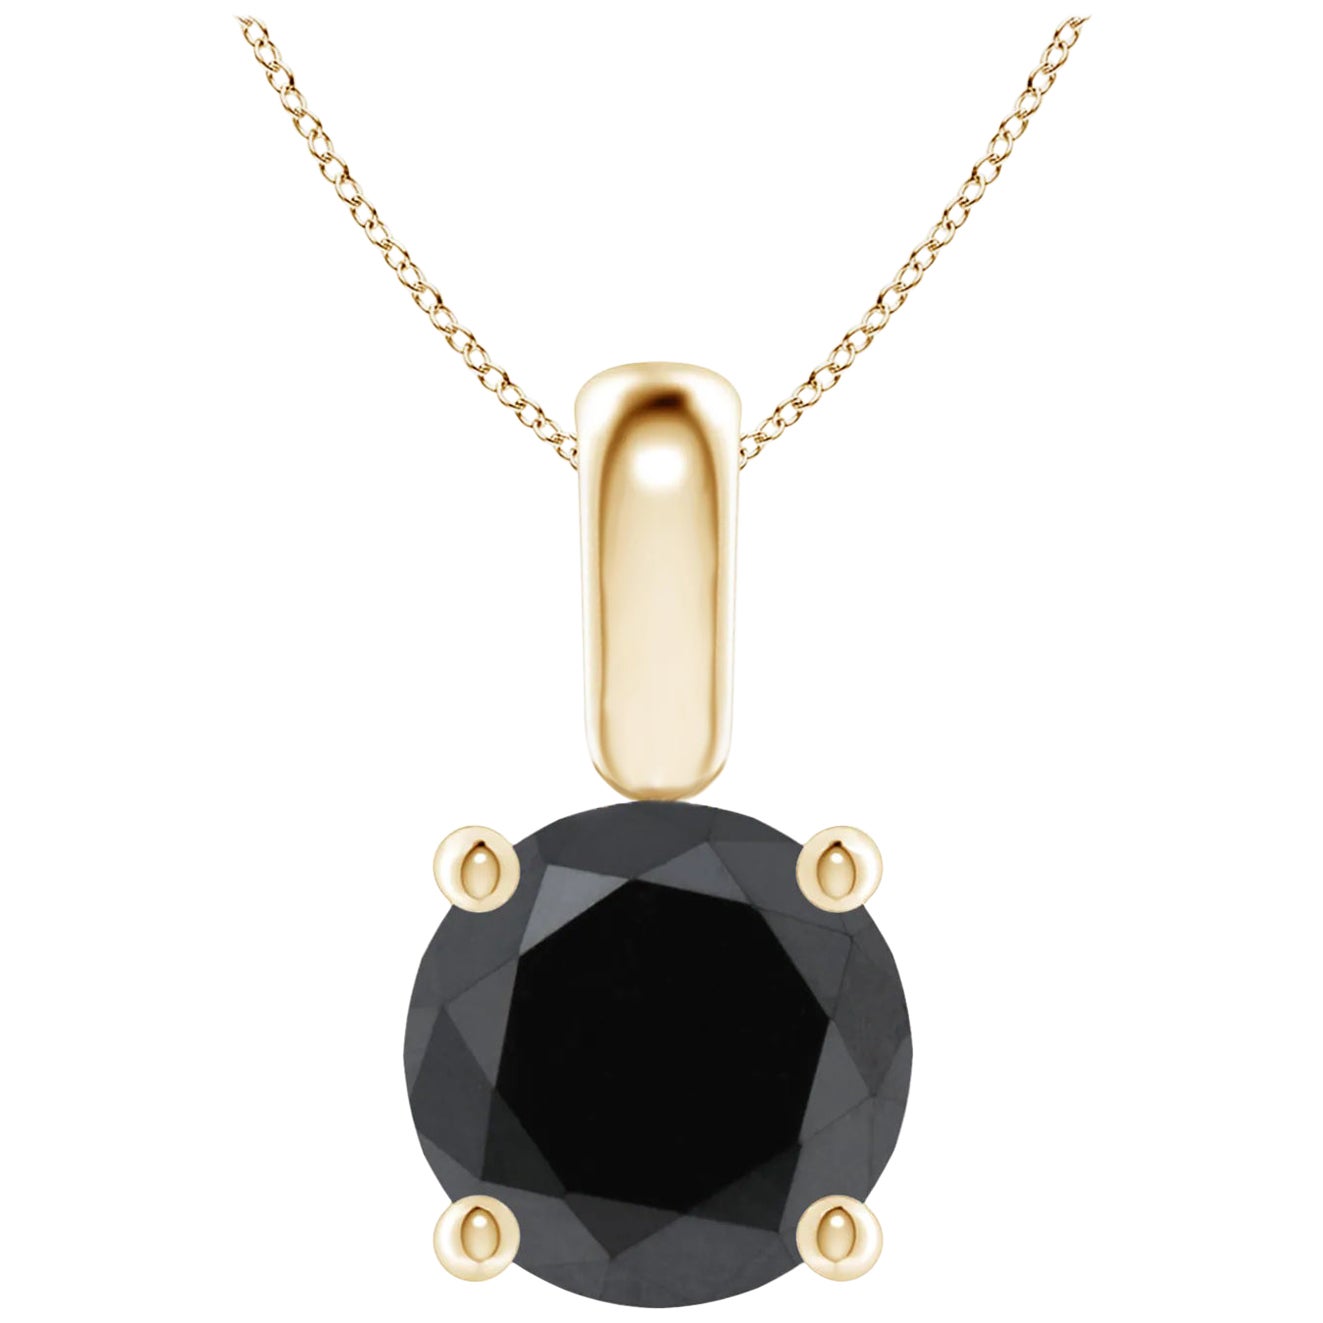 3.03 Carat Round Black Diamond Solitaire Pendant Necklace in 14K Yellow Gold